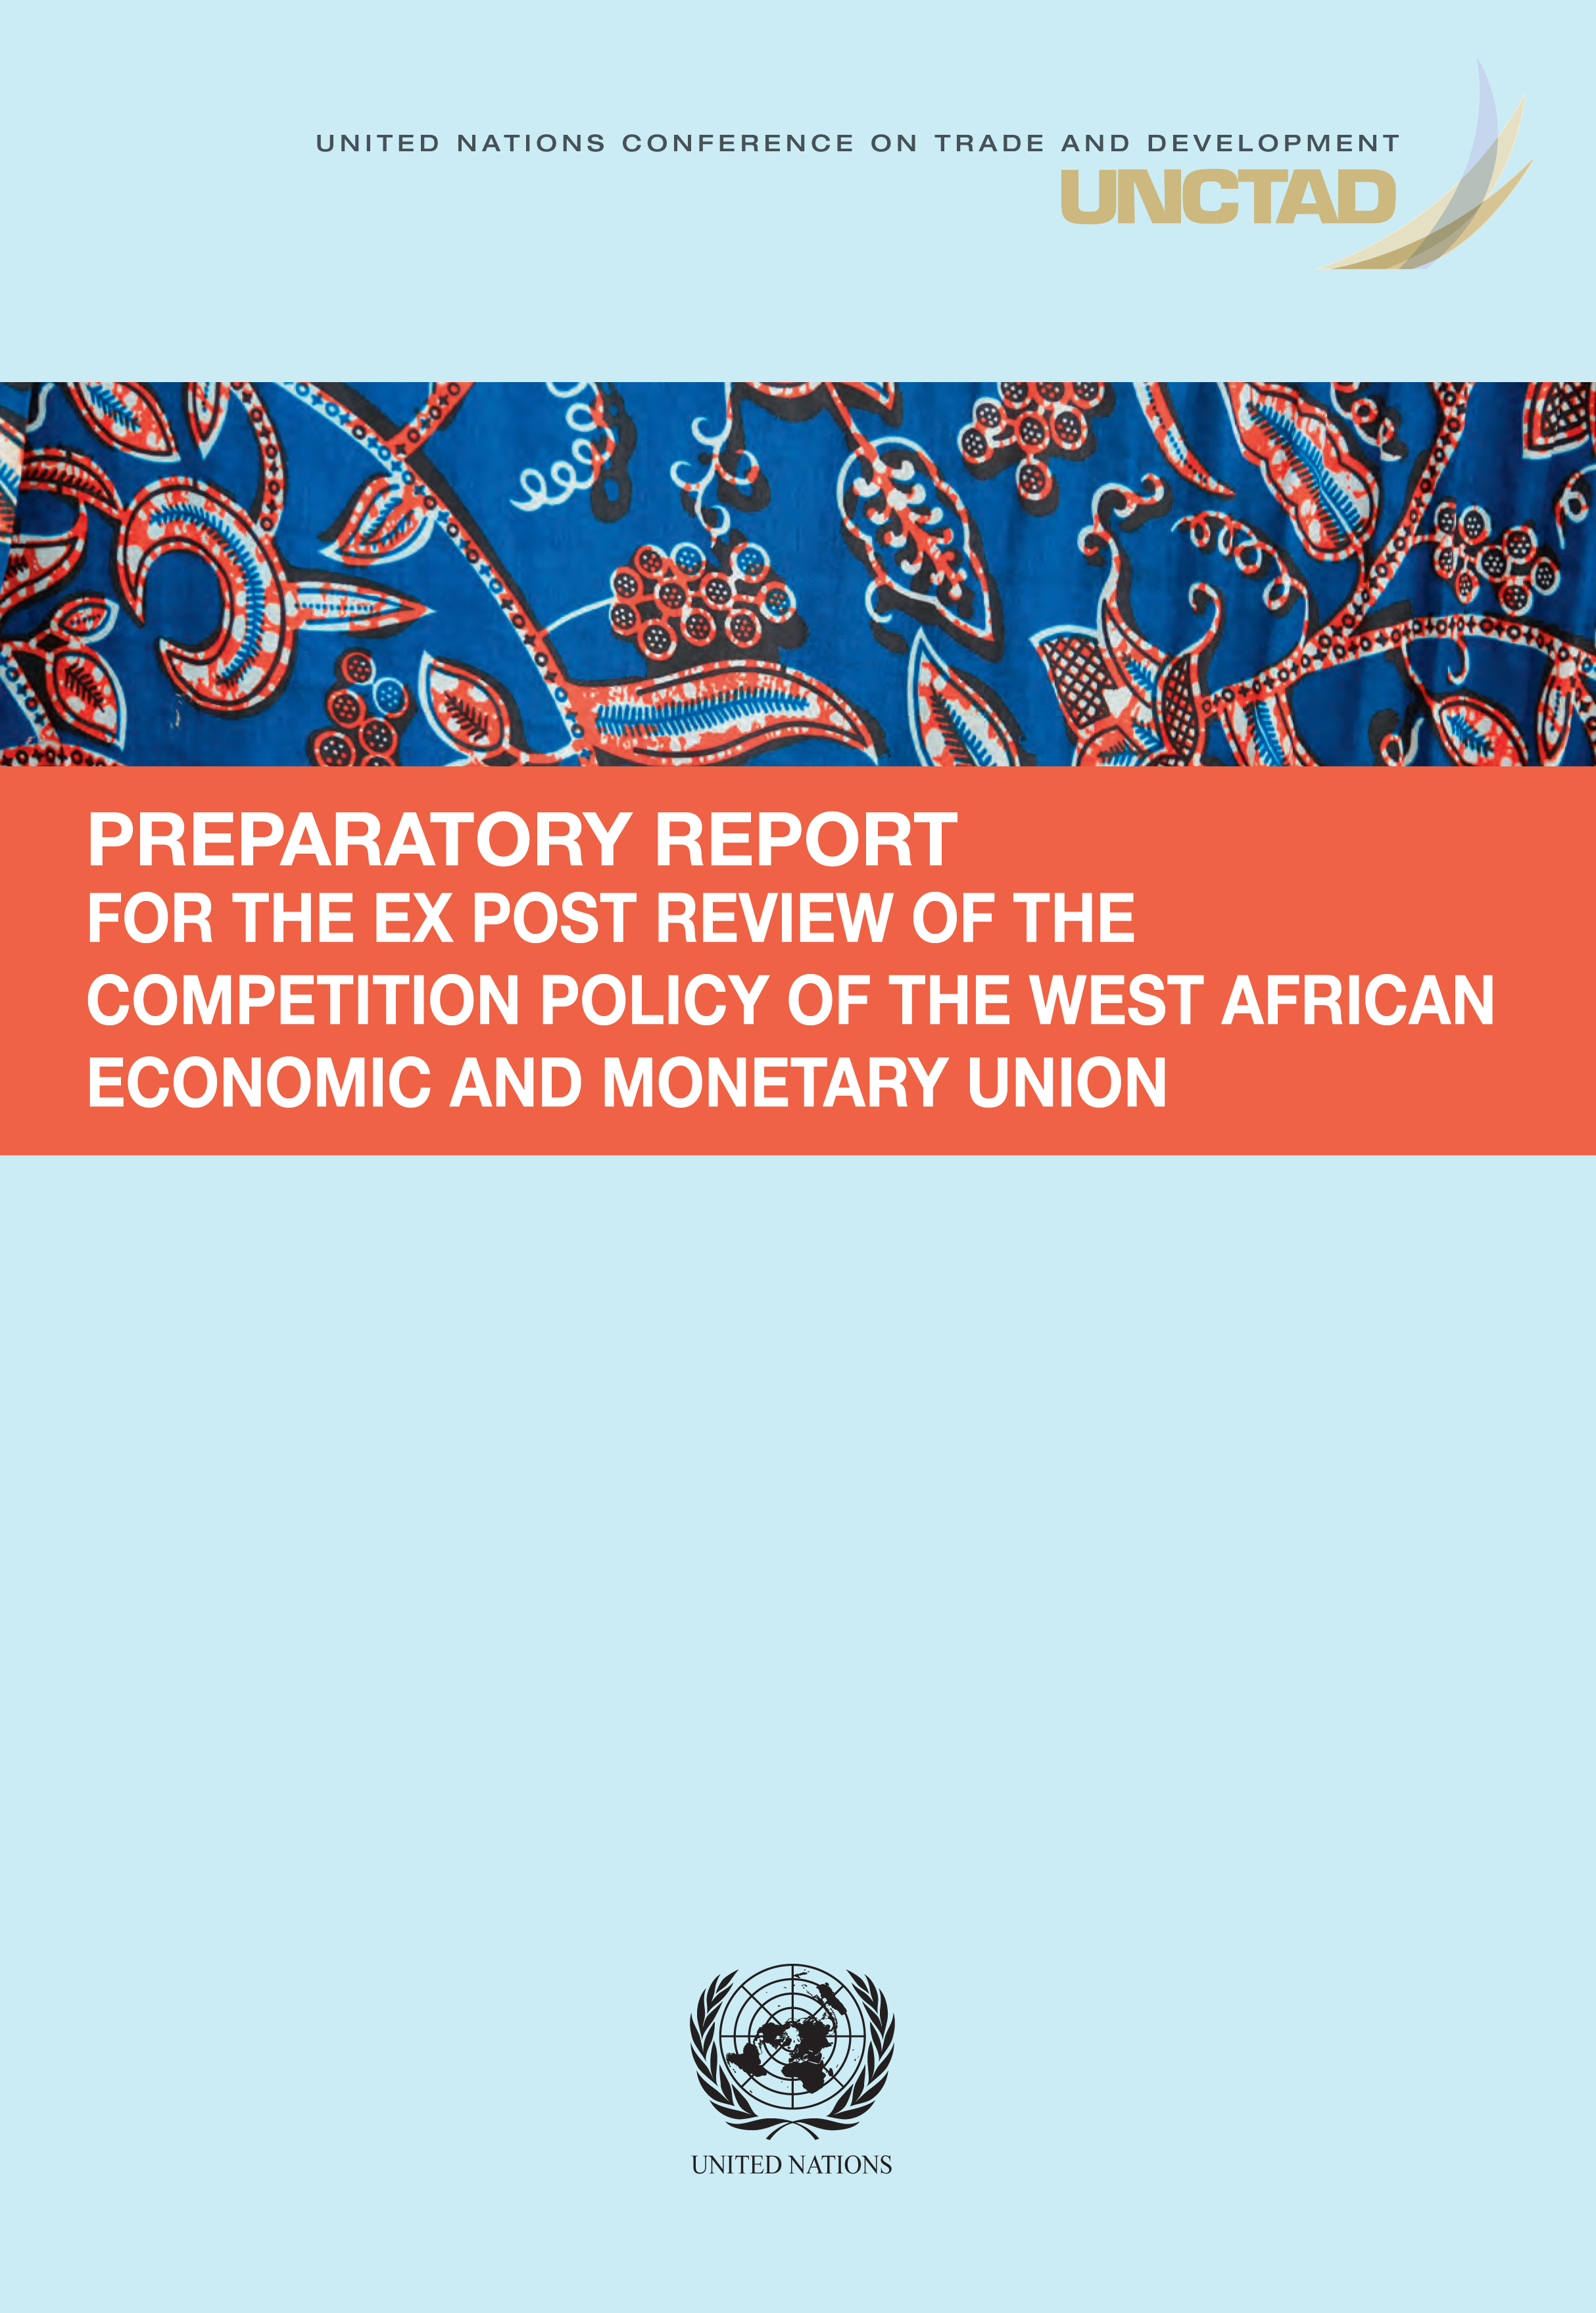 image of Preparatory Report for the Ex Post Review of the Competition Policy of the West African Economic and Monetary Union